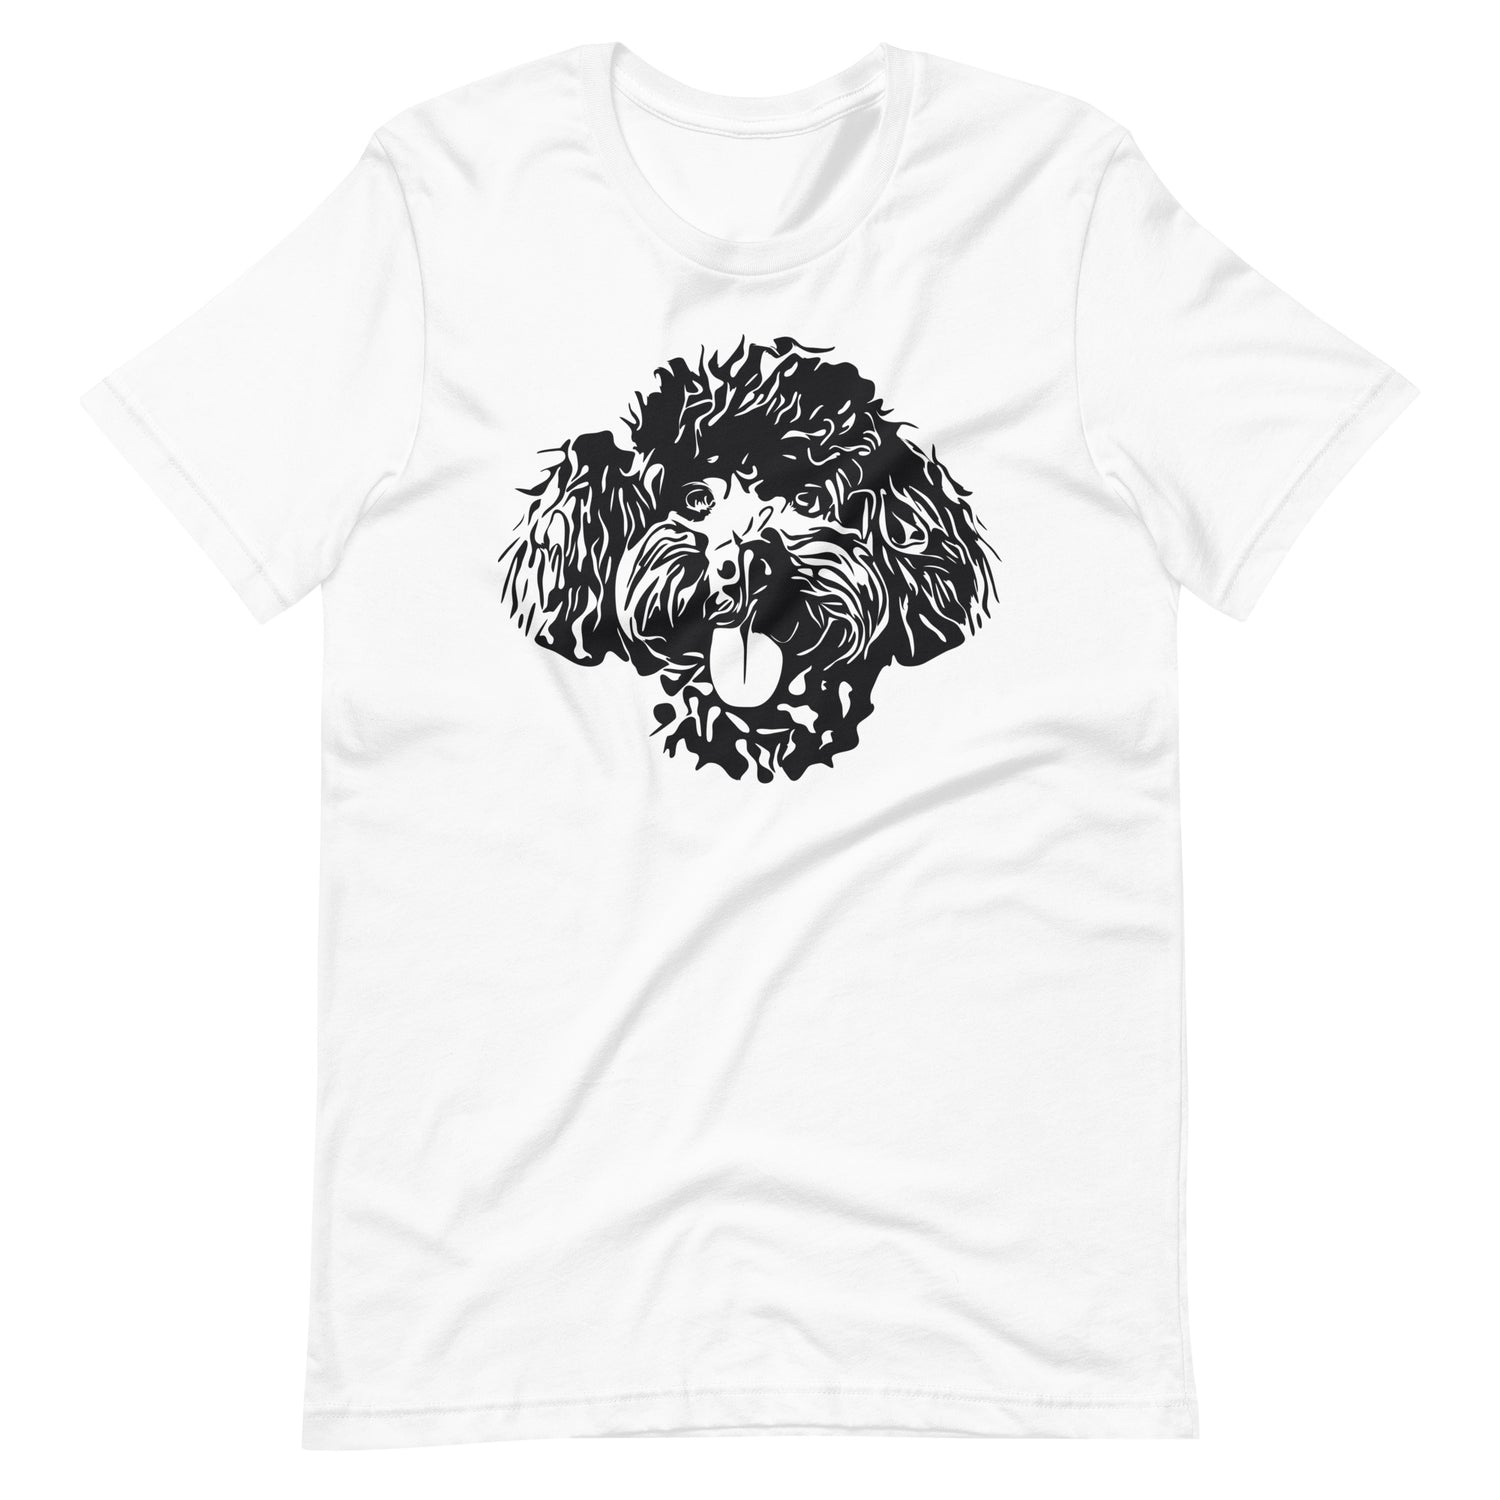 Toy Poodle face silhouette on unisex white t-shirt